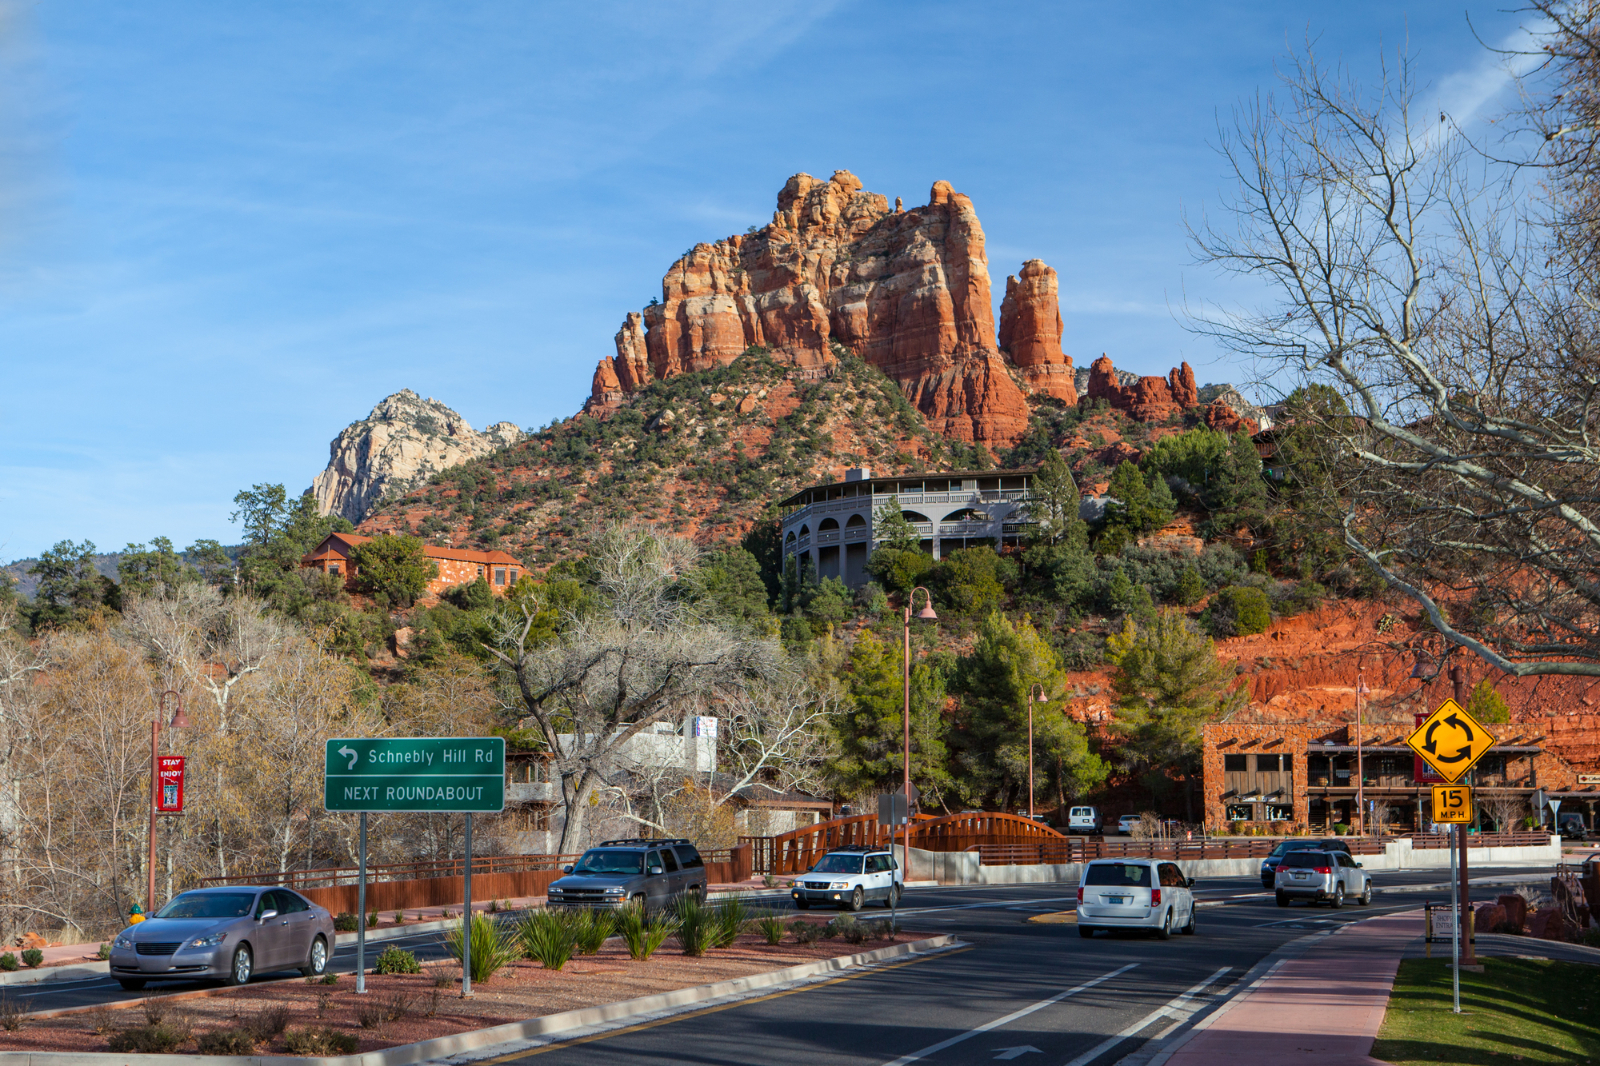 Experience Sedona In Complete Comfort With Private Luxury Transportation